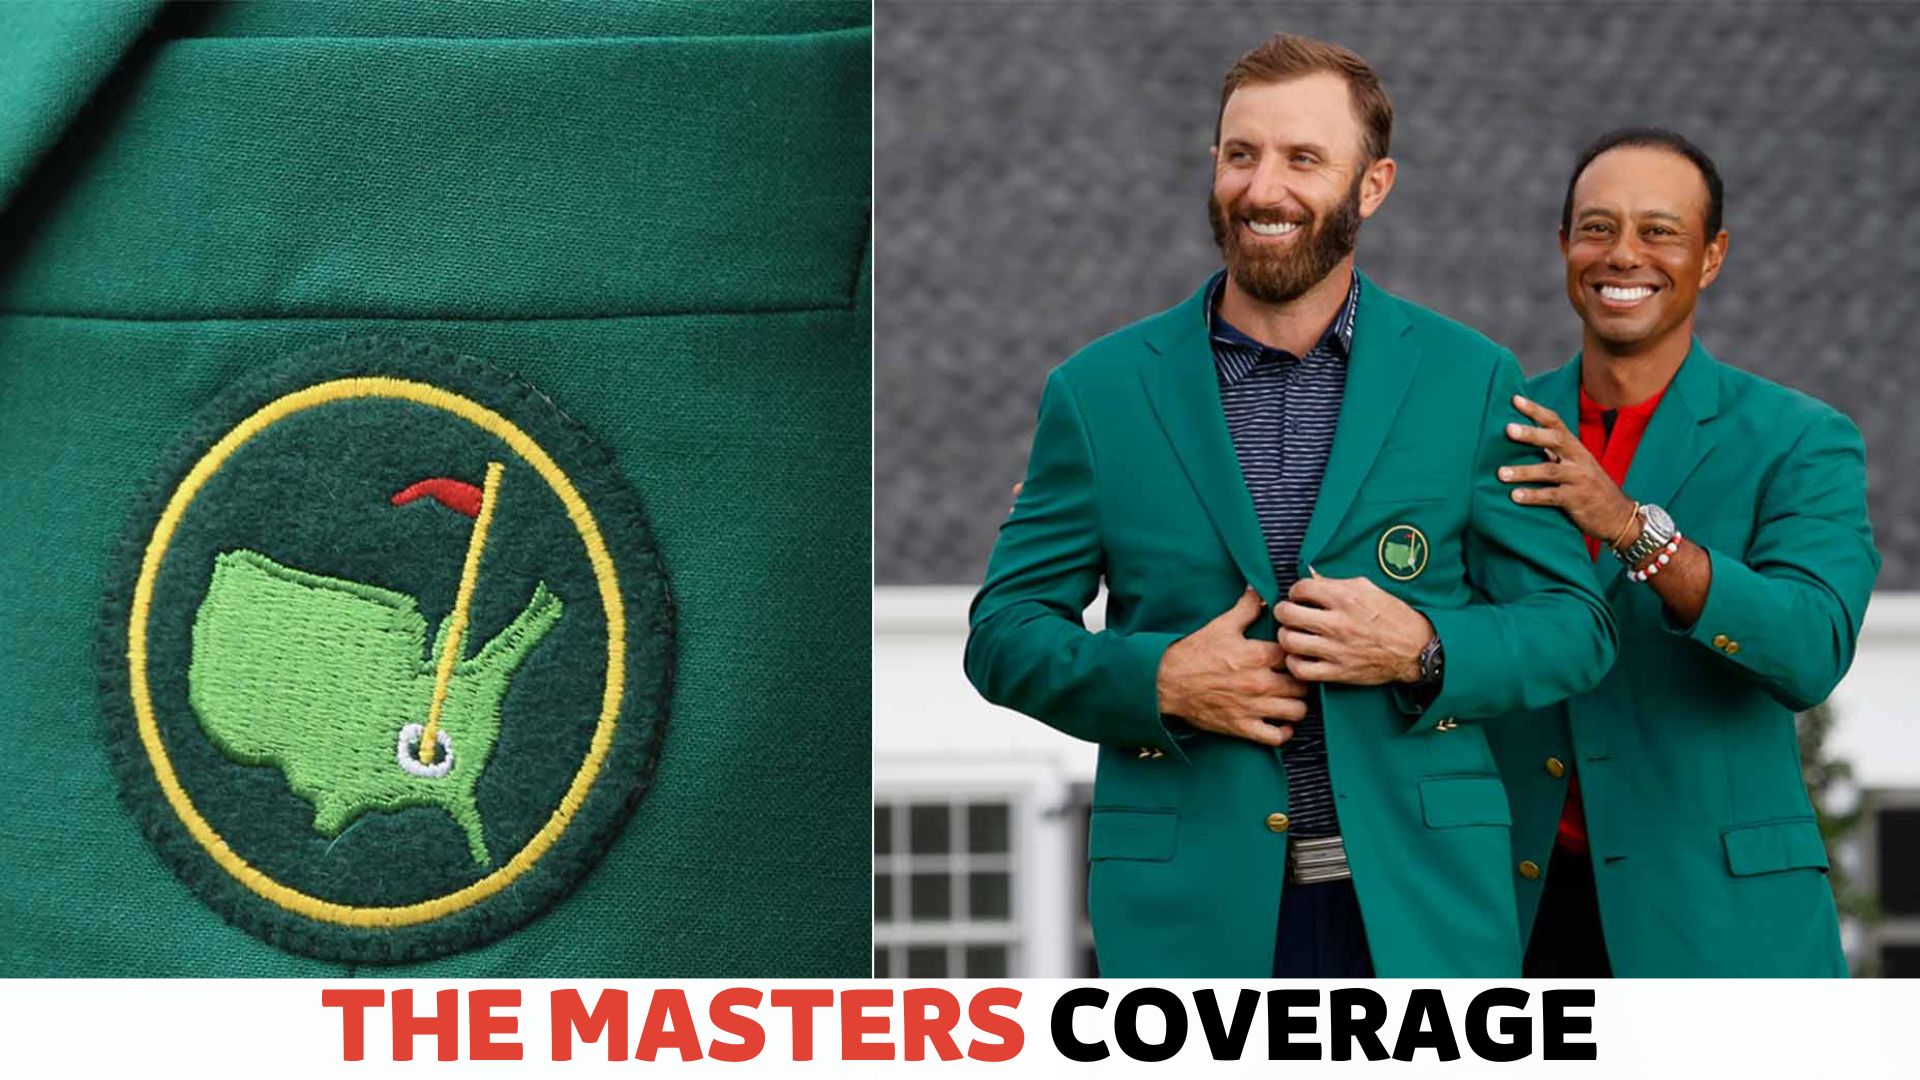 How to Watch The Masters Green Jacket Ceremony Live Online in HD